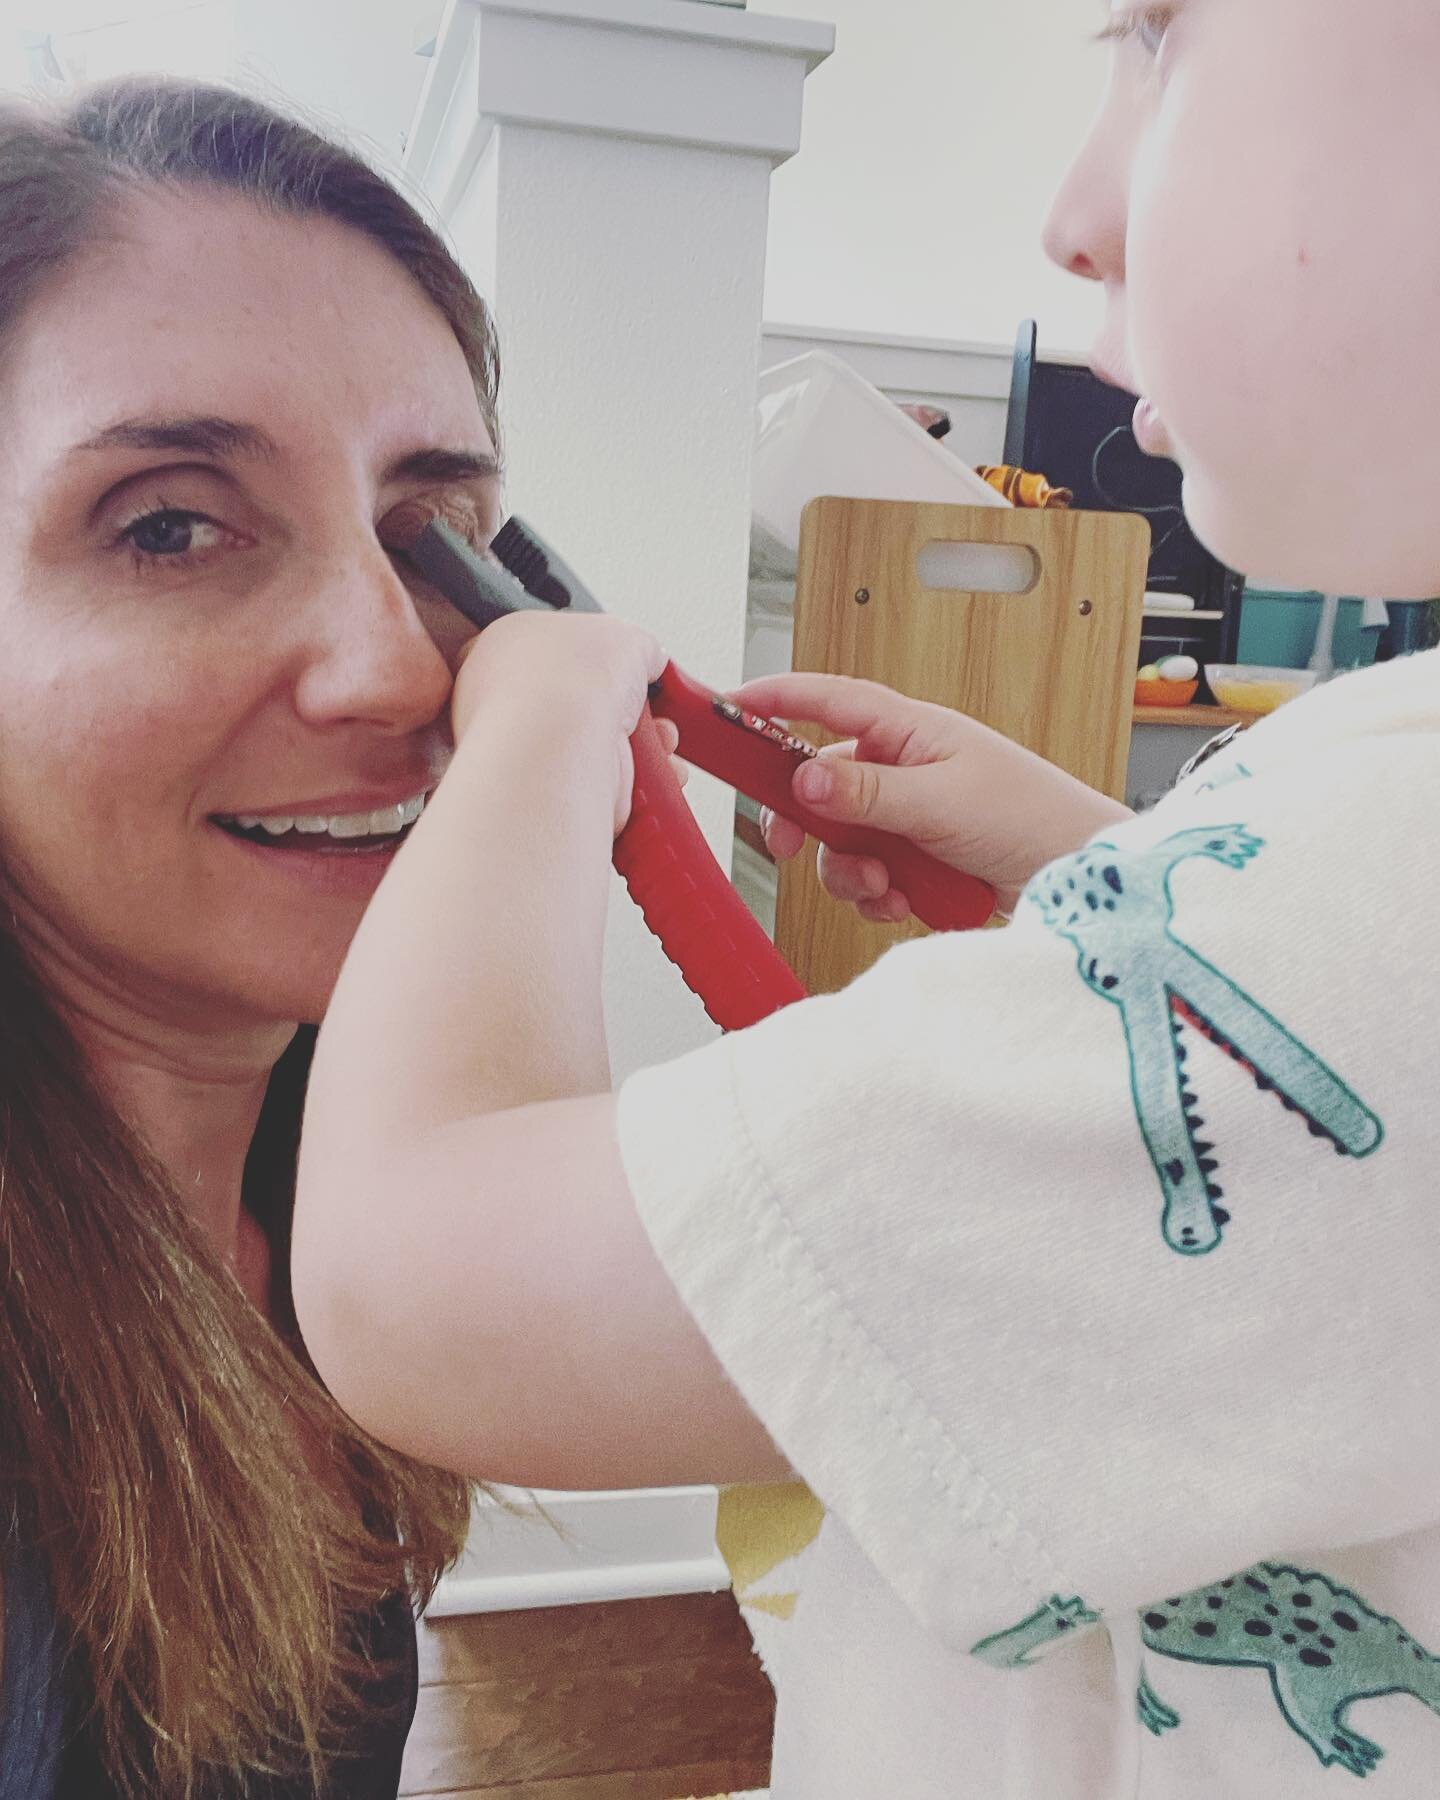 &ldquo;Now I&rsquo;m going to cut your eye. I&rsquo;ll be really gentle.&rdquo;

How is your Monday going? 😜

#toddlermom #toddlermomlife #momlife #momlifebelike #mondaysamiright